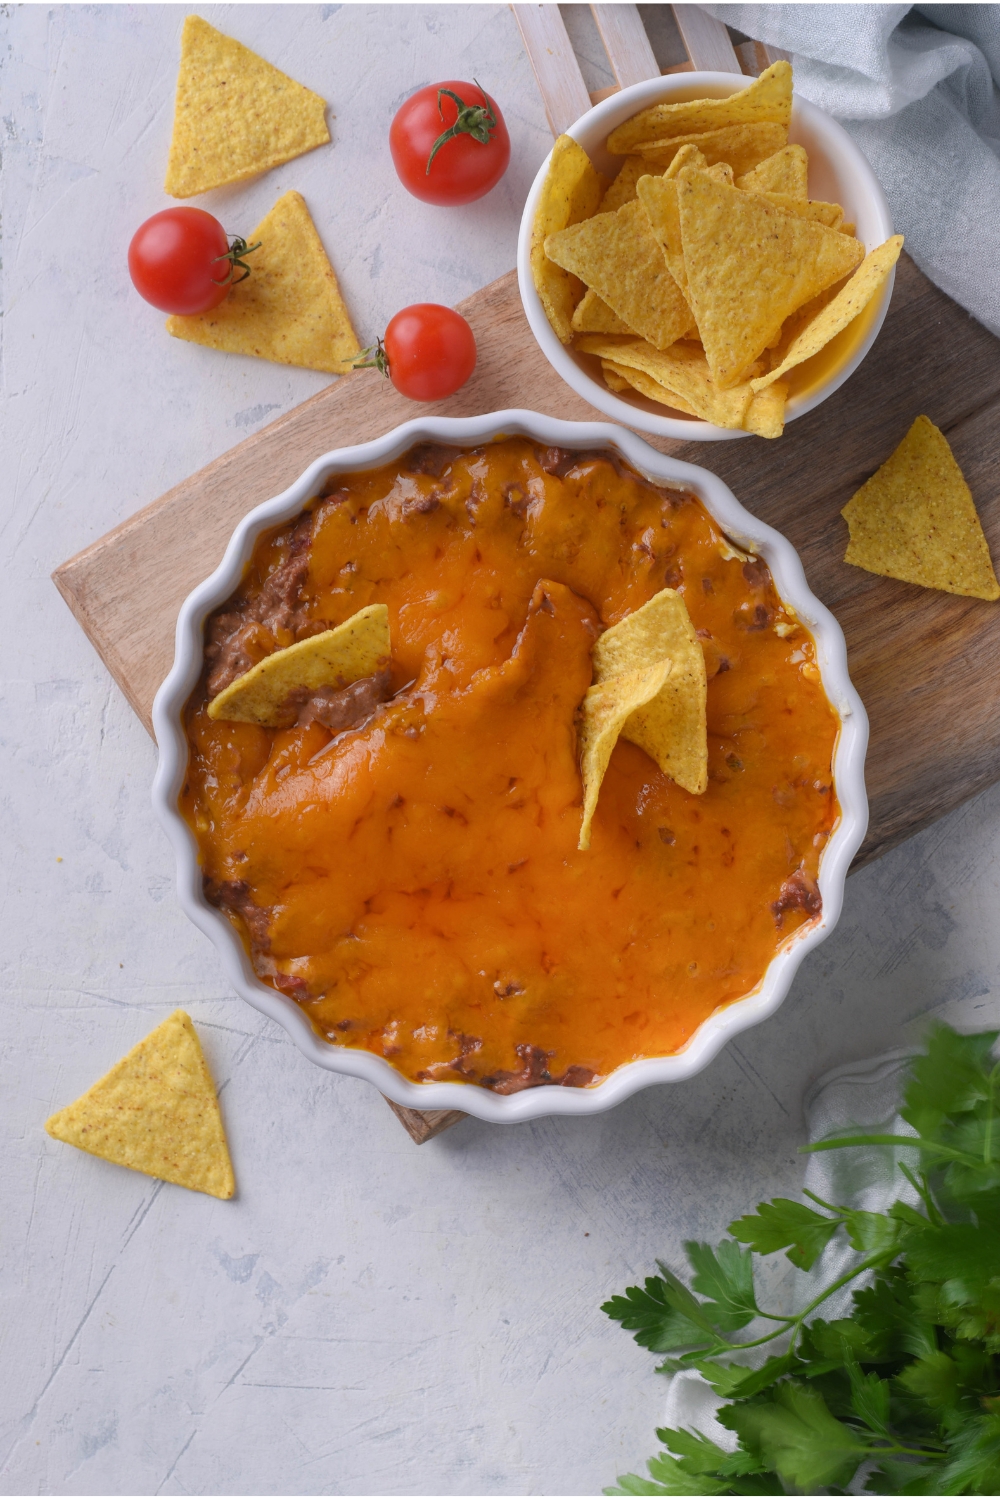 Overhead view of skyline chili dip with three tortilla chips sticking out of the dip. The dip is on a wood board and next to it are cherry tomatoes and a bowl of tortilla chips with some sprinkled on the counter.